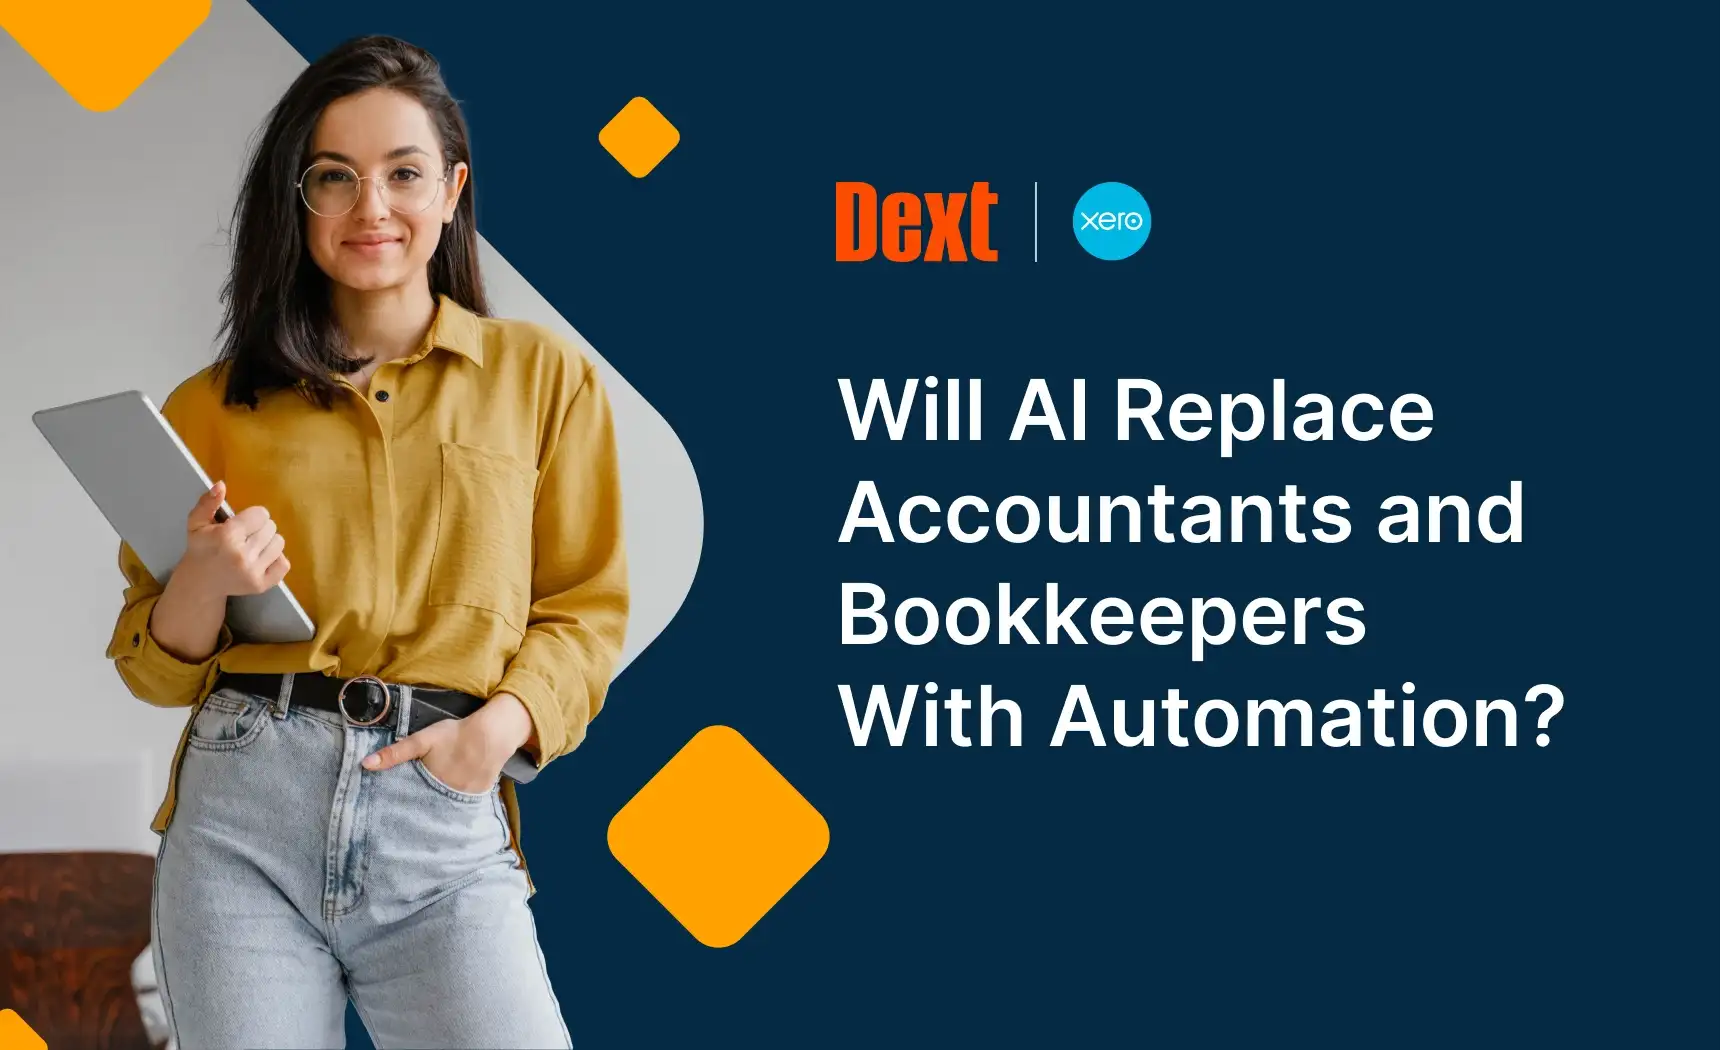 Dext: Will AI Replace Accountants and Bookkeepers With Automation? image